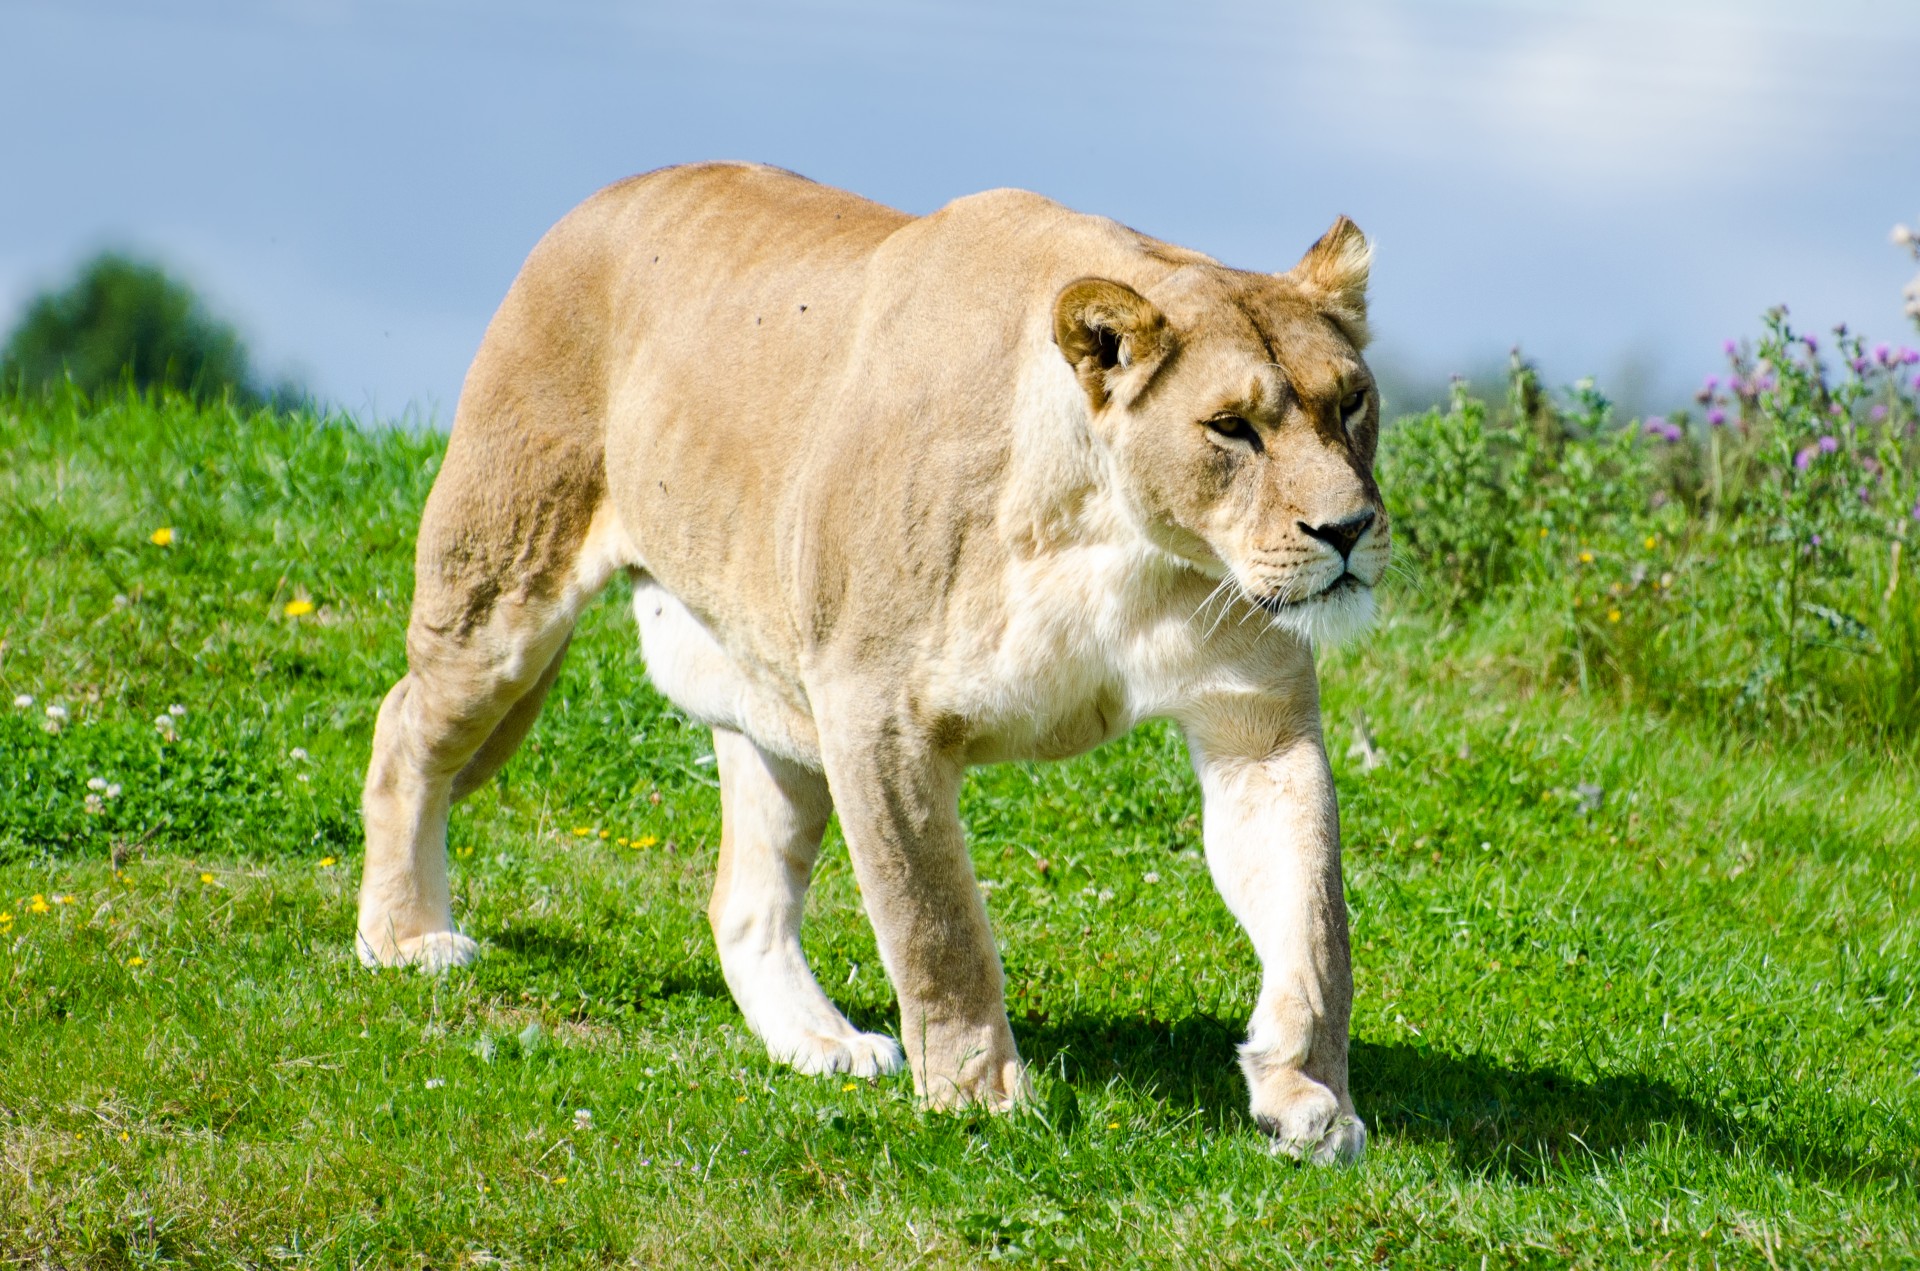 lioness - animal, South Africa